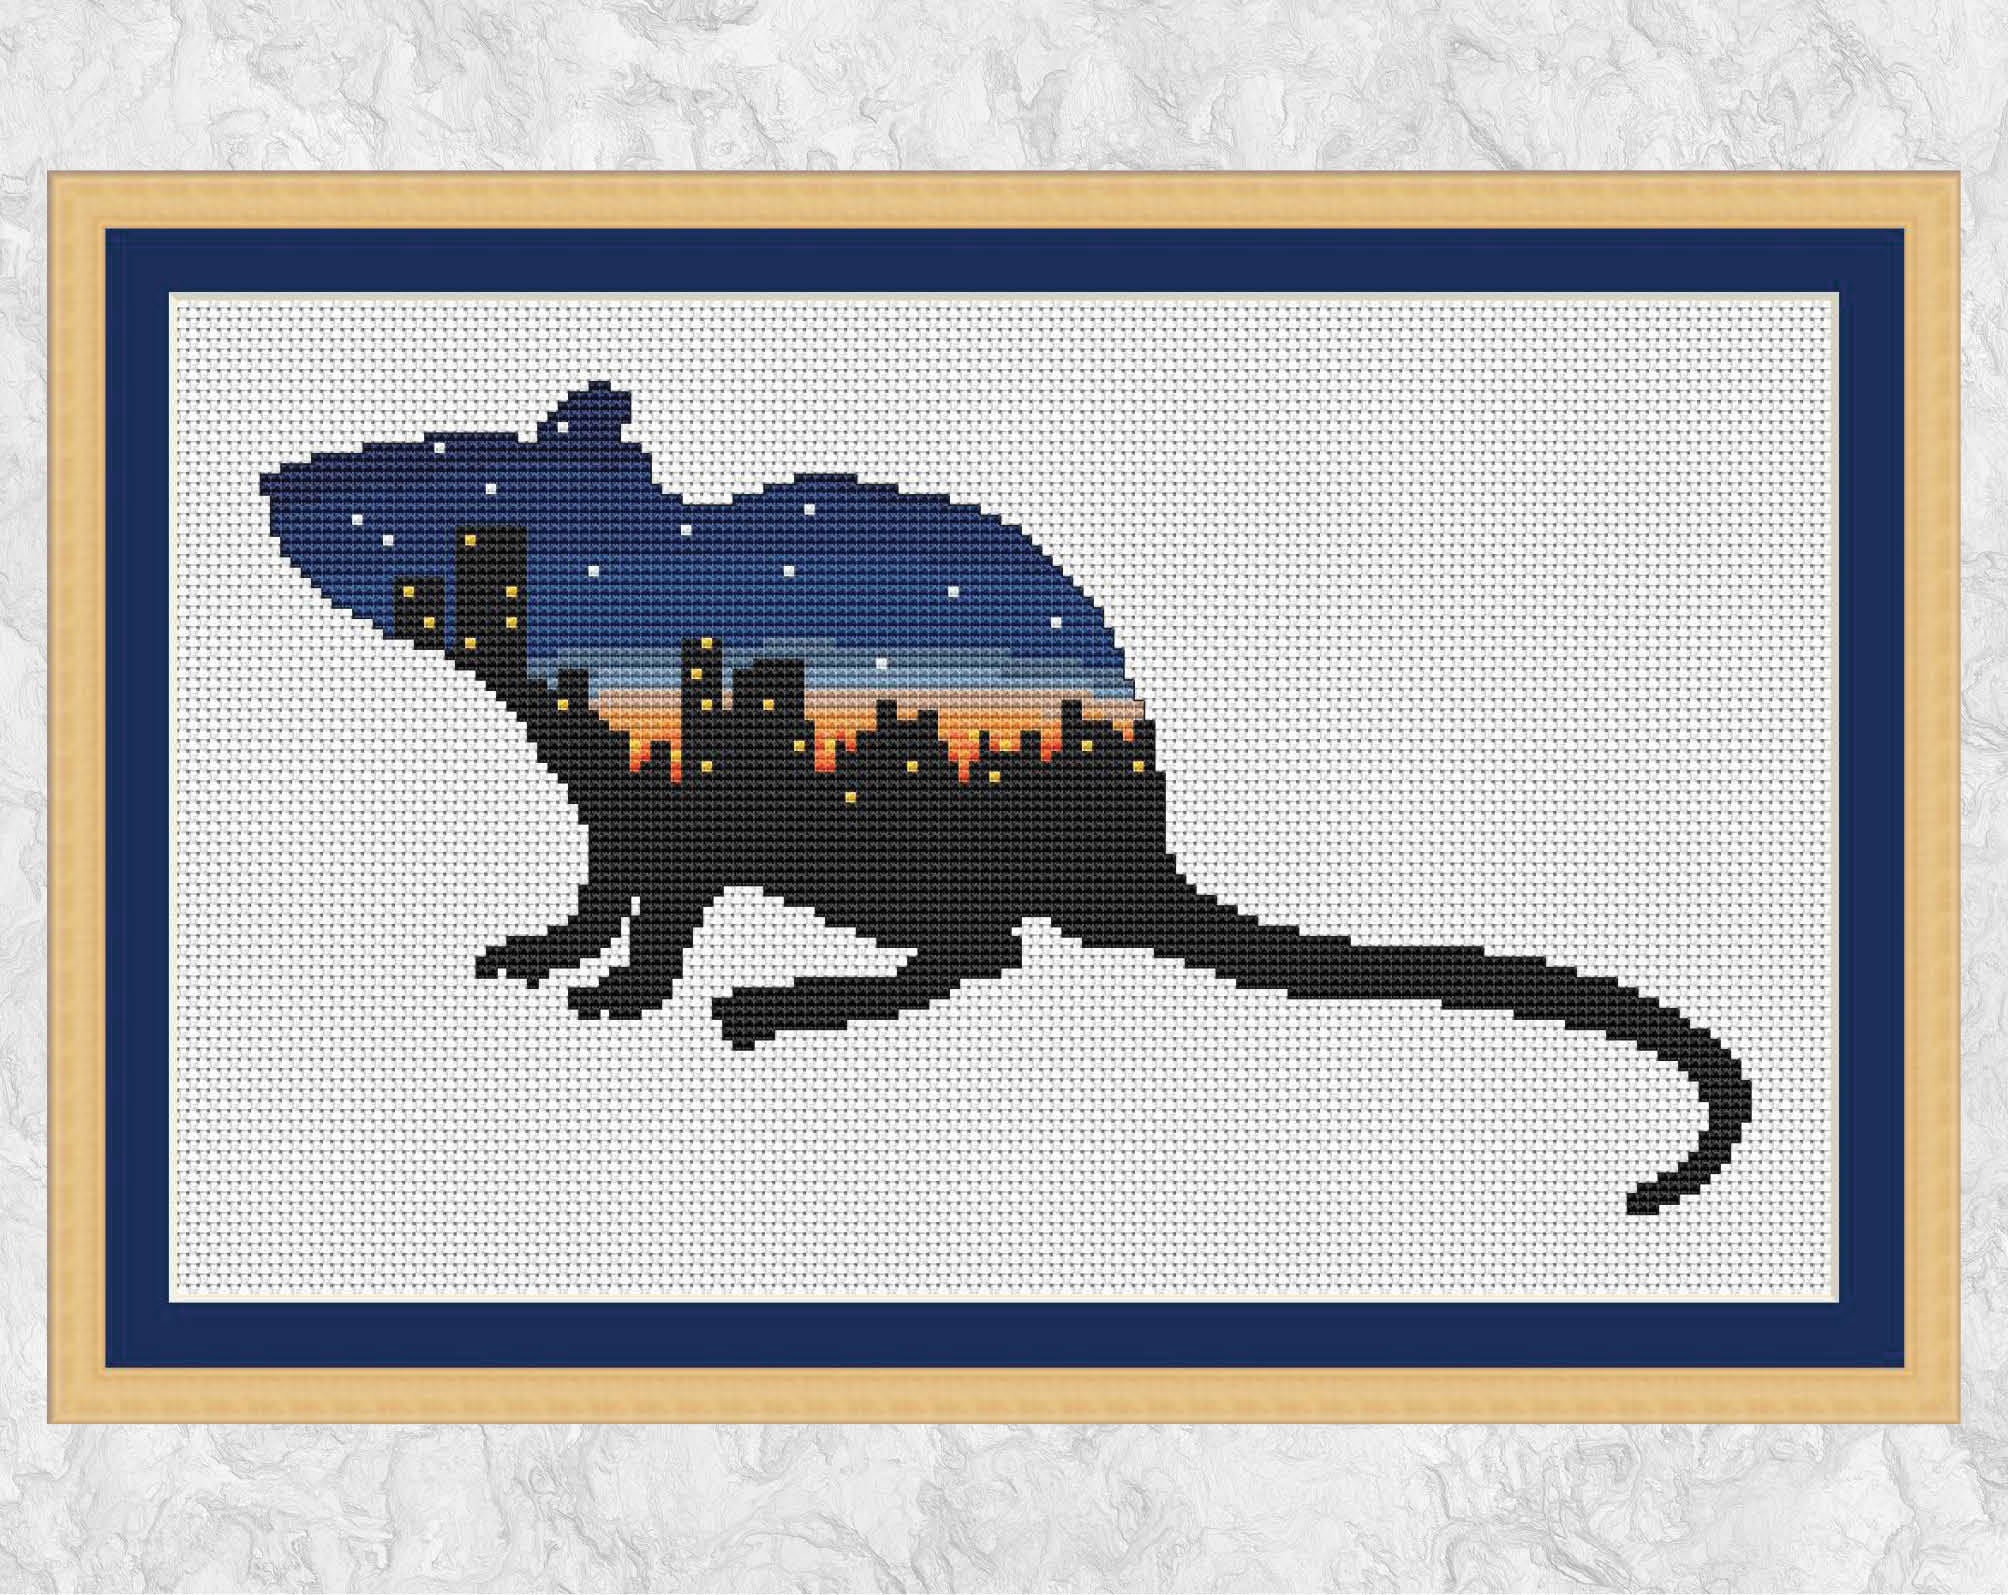 Cross stitch pattern of the silhouette of a rat filled with the scene of a city at twilight. With frame.